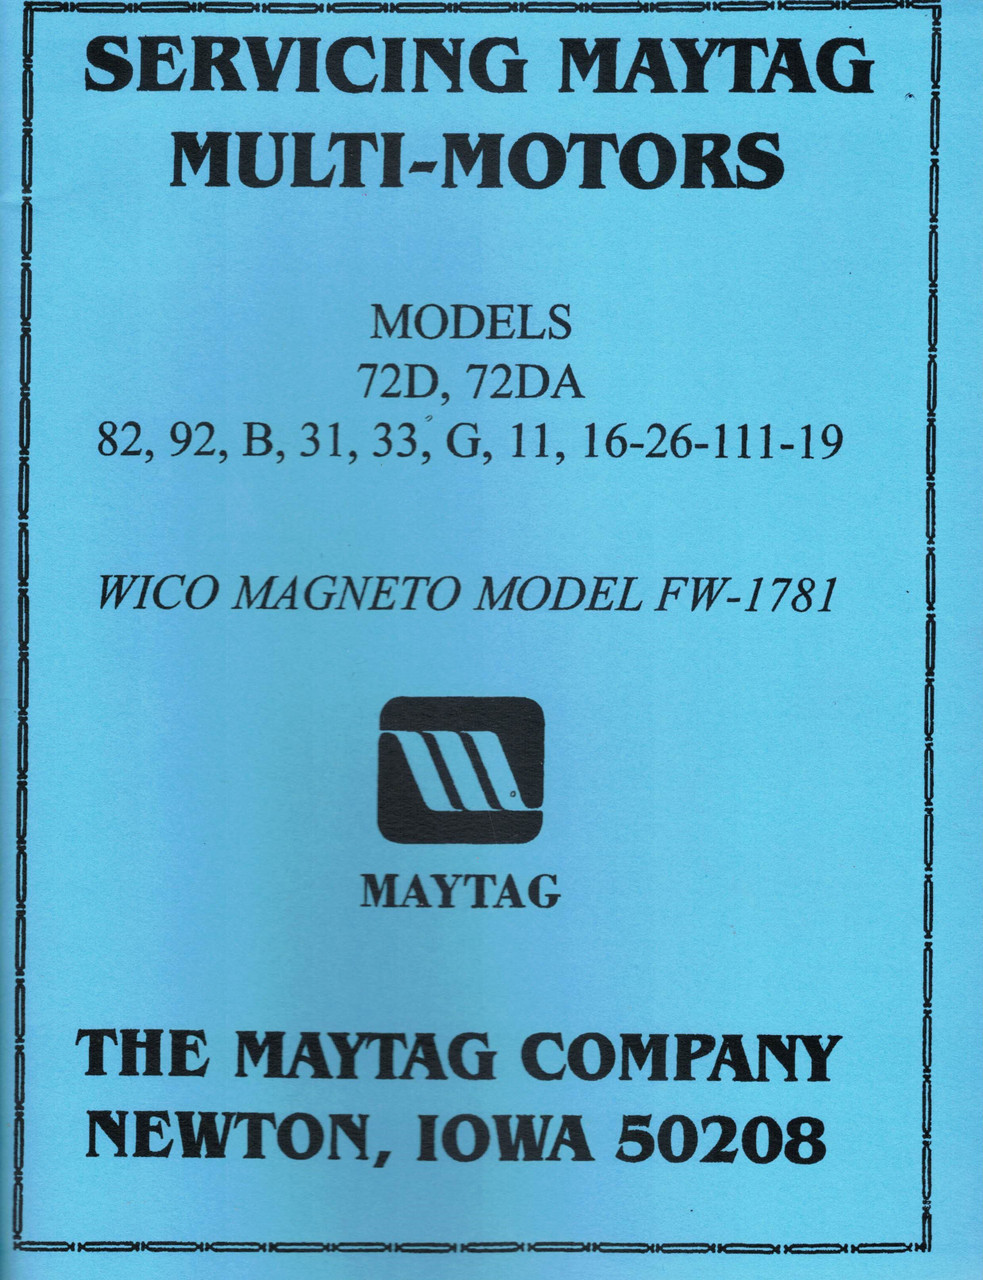 Maytag Song Book Dealer Gas Engine Motor Washer Hit Miss Model 92 82 72 Upright 